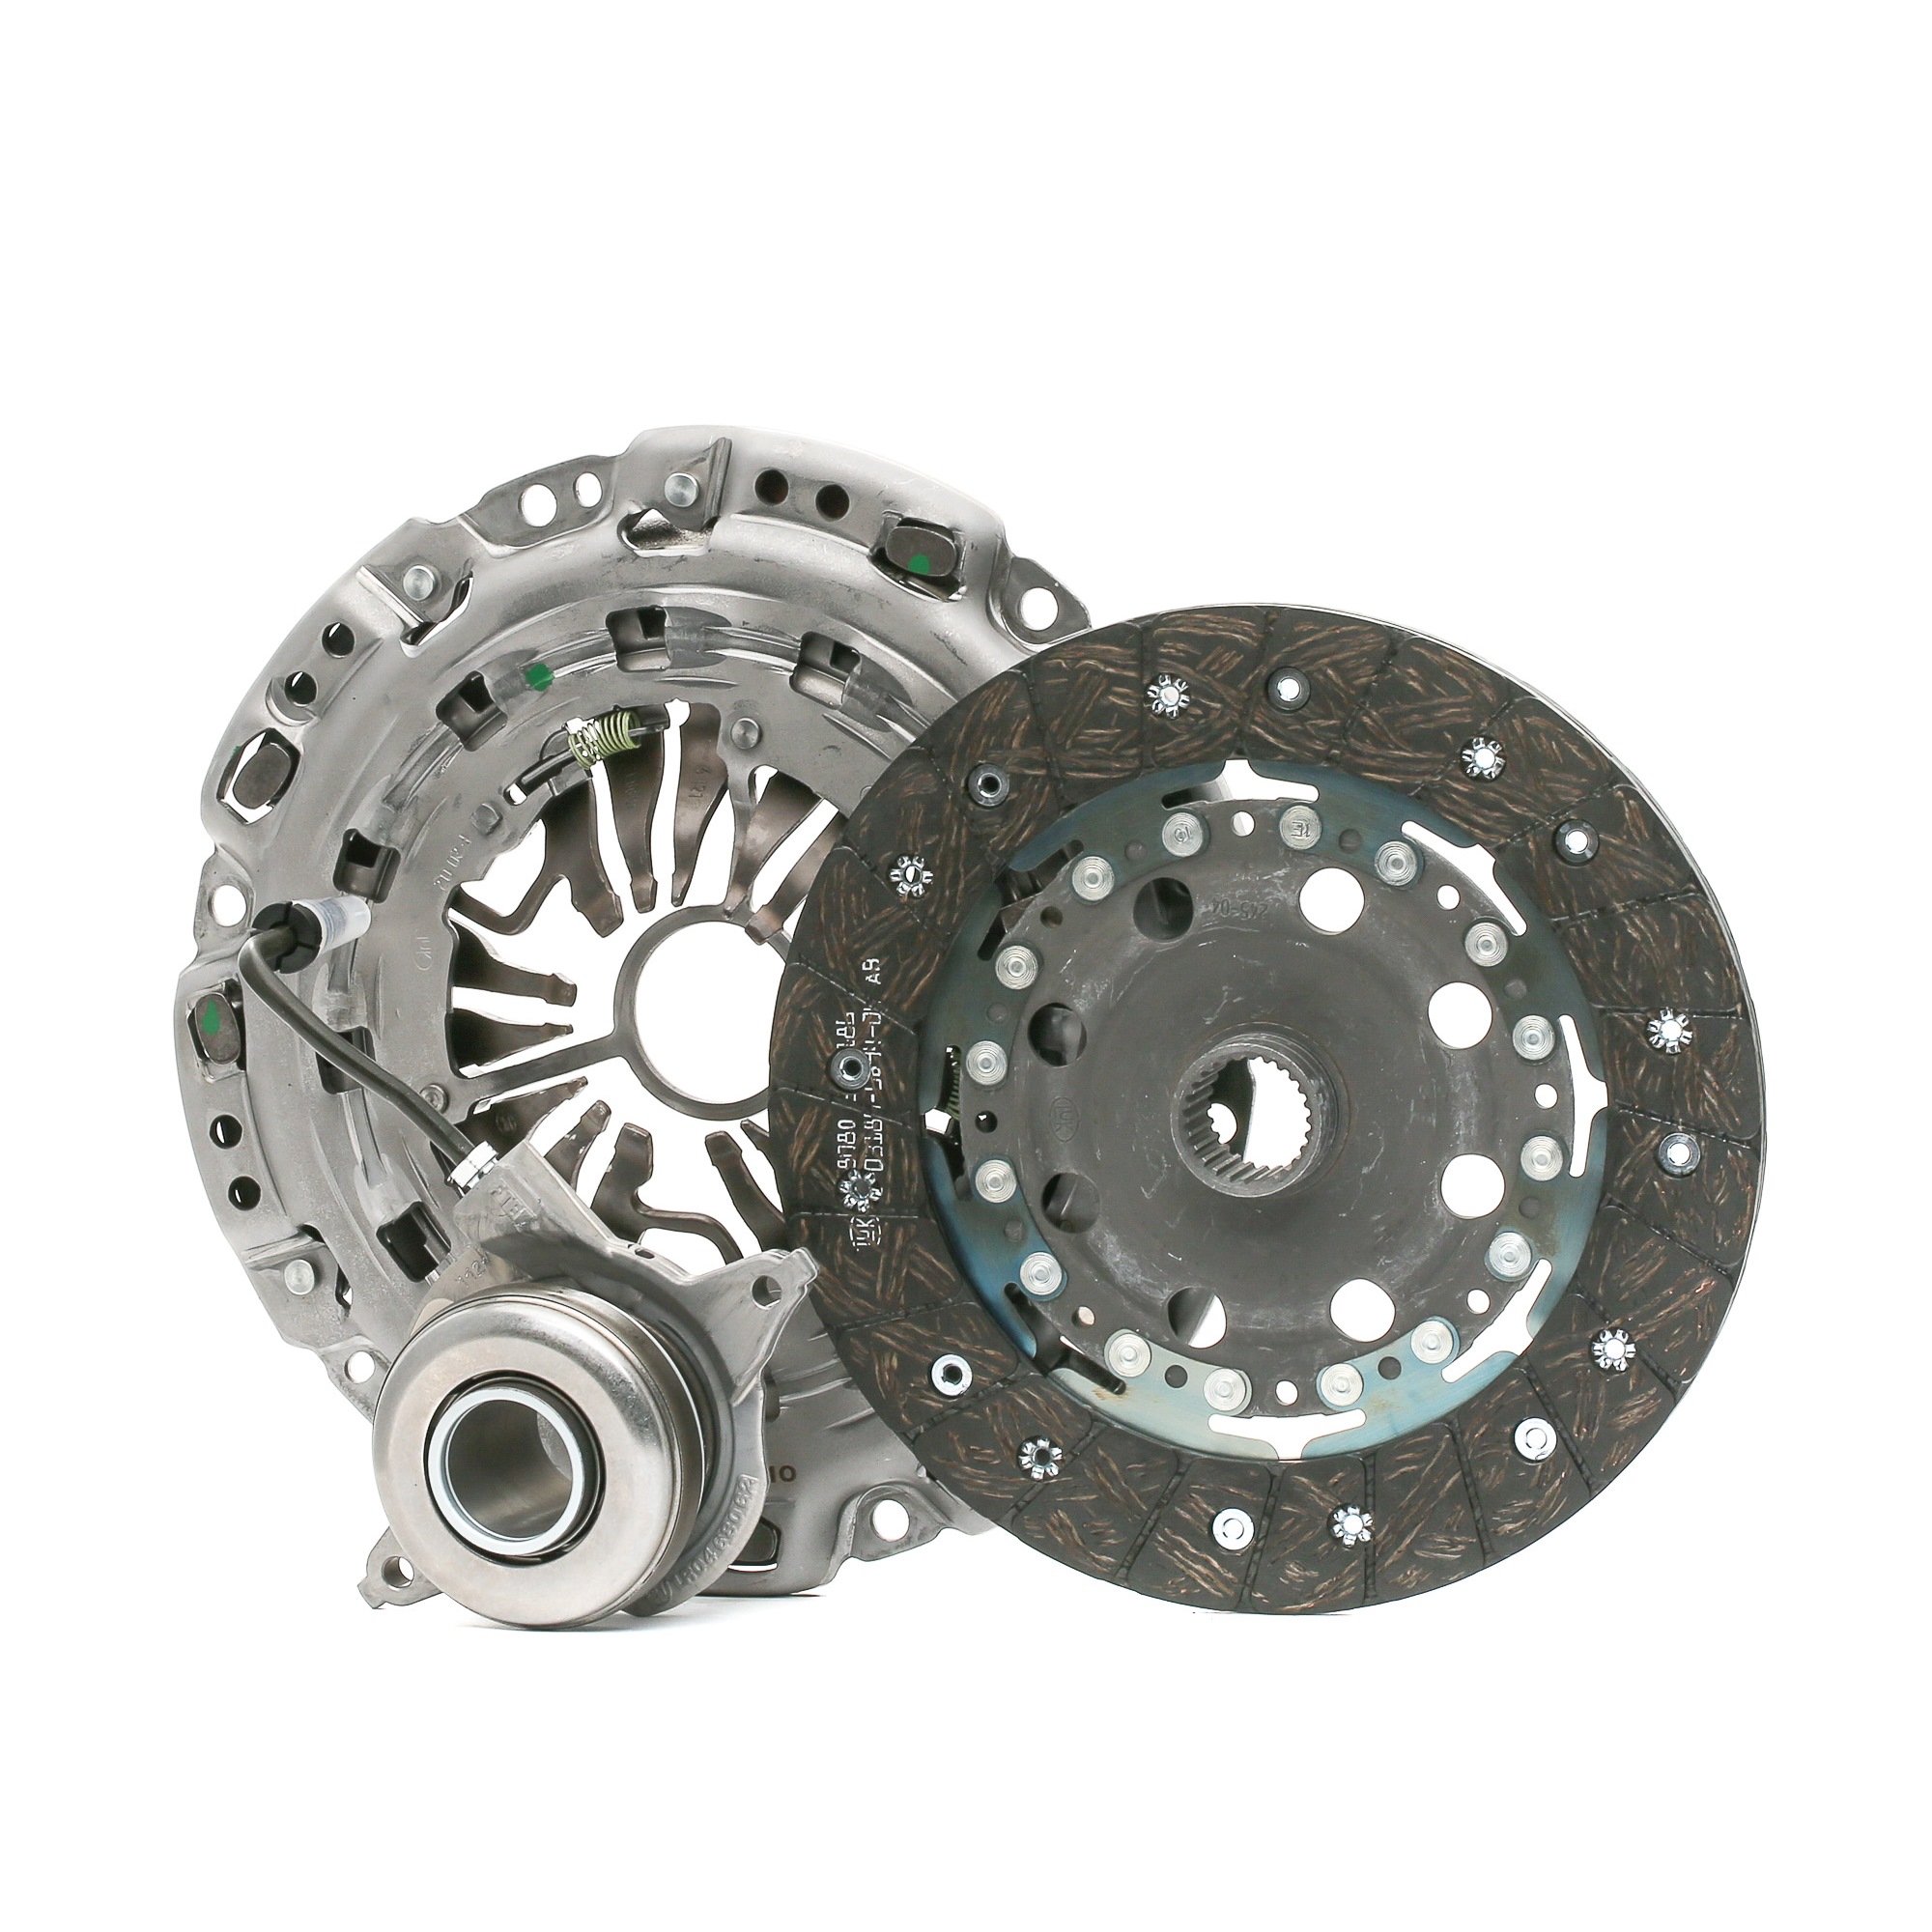 623 3215 33 LuK Clutch set MERCEDES-BENZ for engines with dual-mass flywheel, with central slave cylinder, Requires special tools for mounting, Check and replace dual-mass flywheel if necessary., with automatic adjustment, 230mm